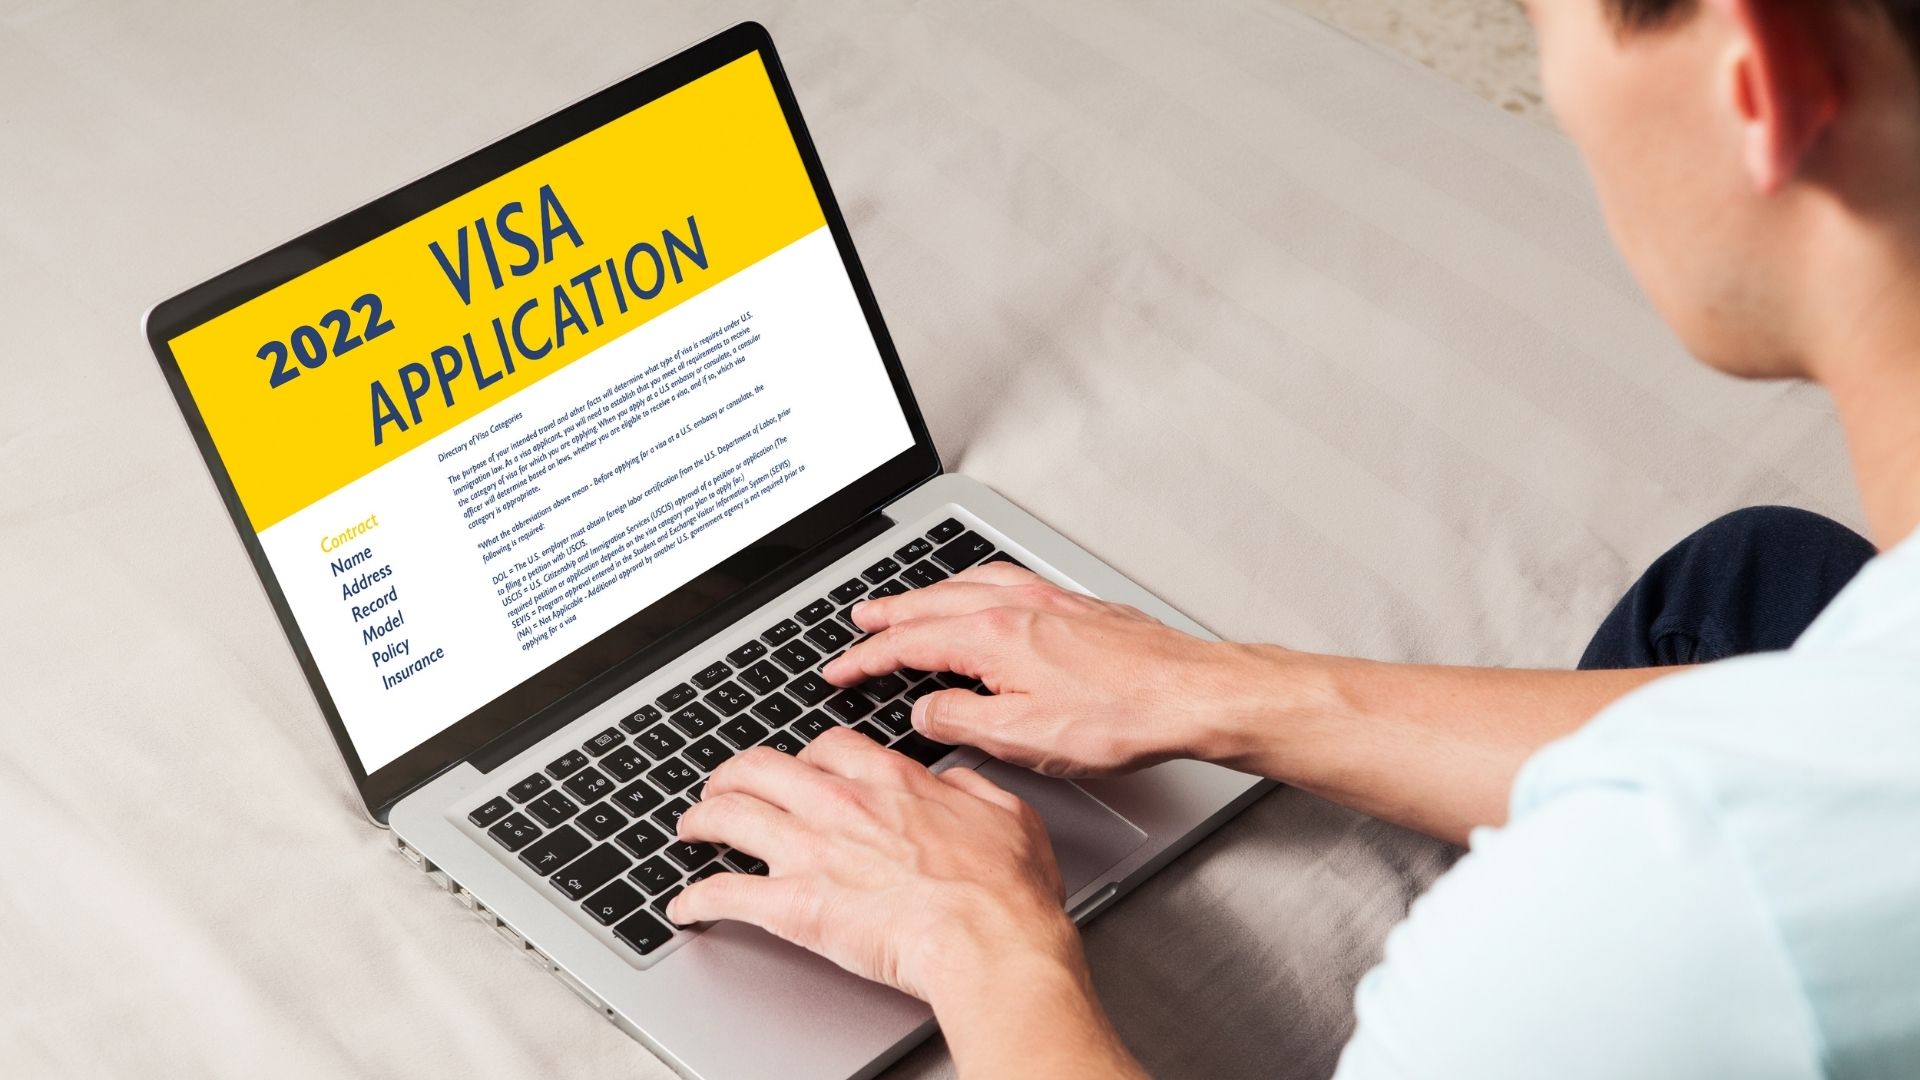 Did you know that you could get an E-2 Visa to reauthorize your EB-5? Find out more options on this article!